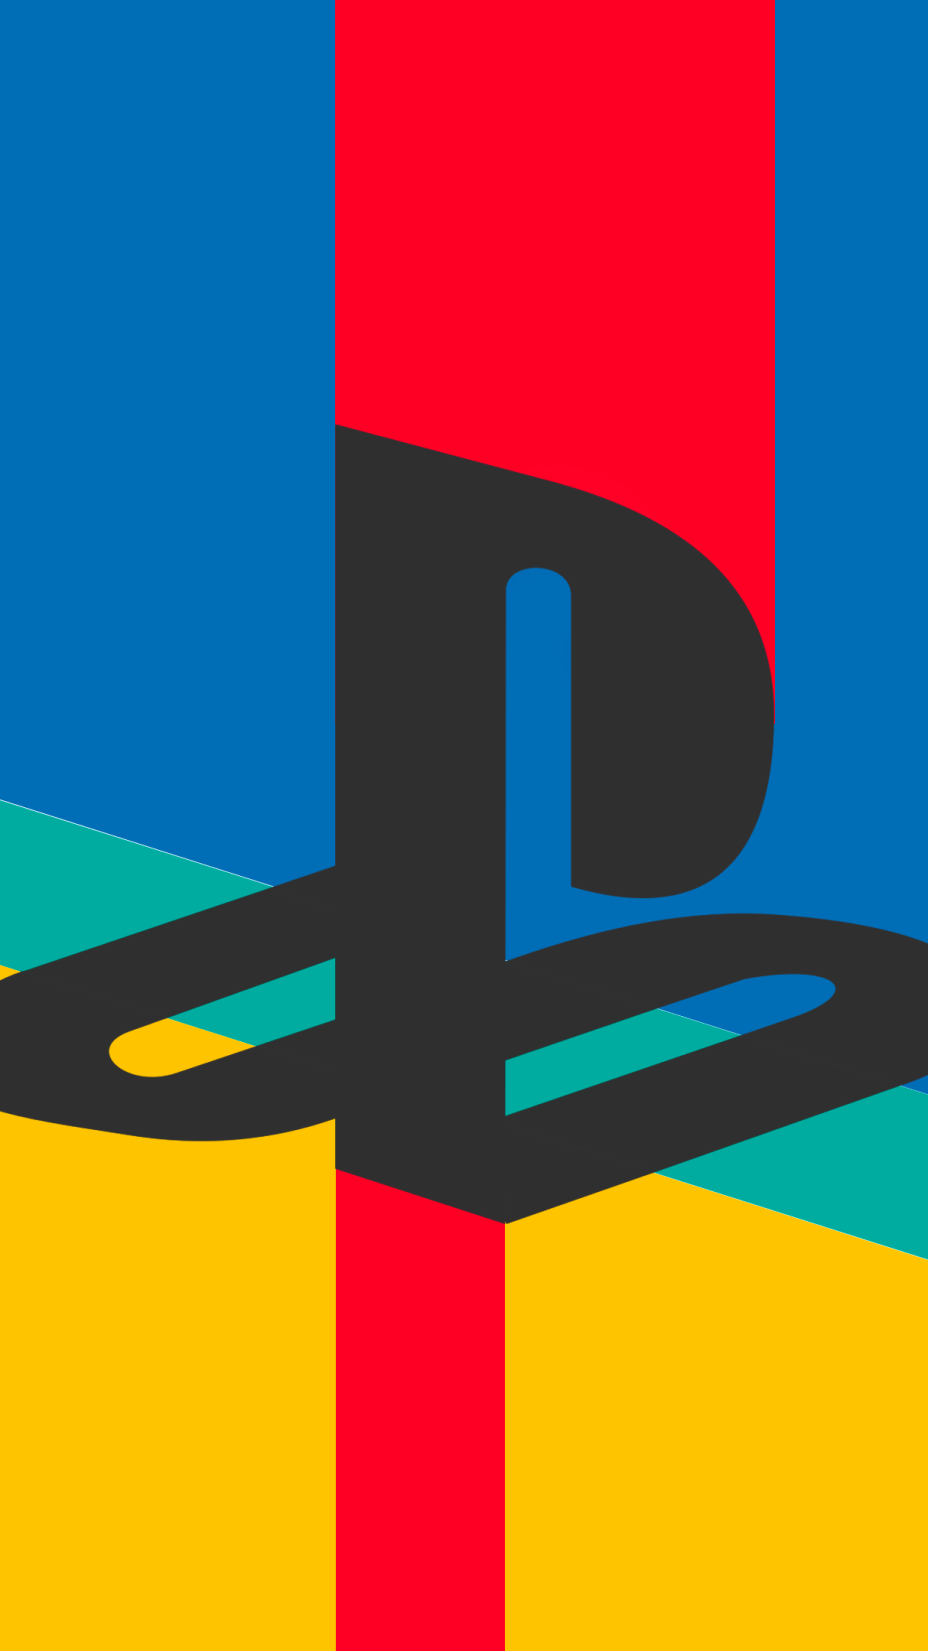 Playstation Phone Wallpapers